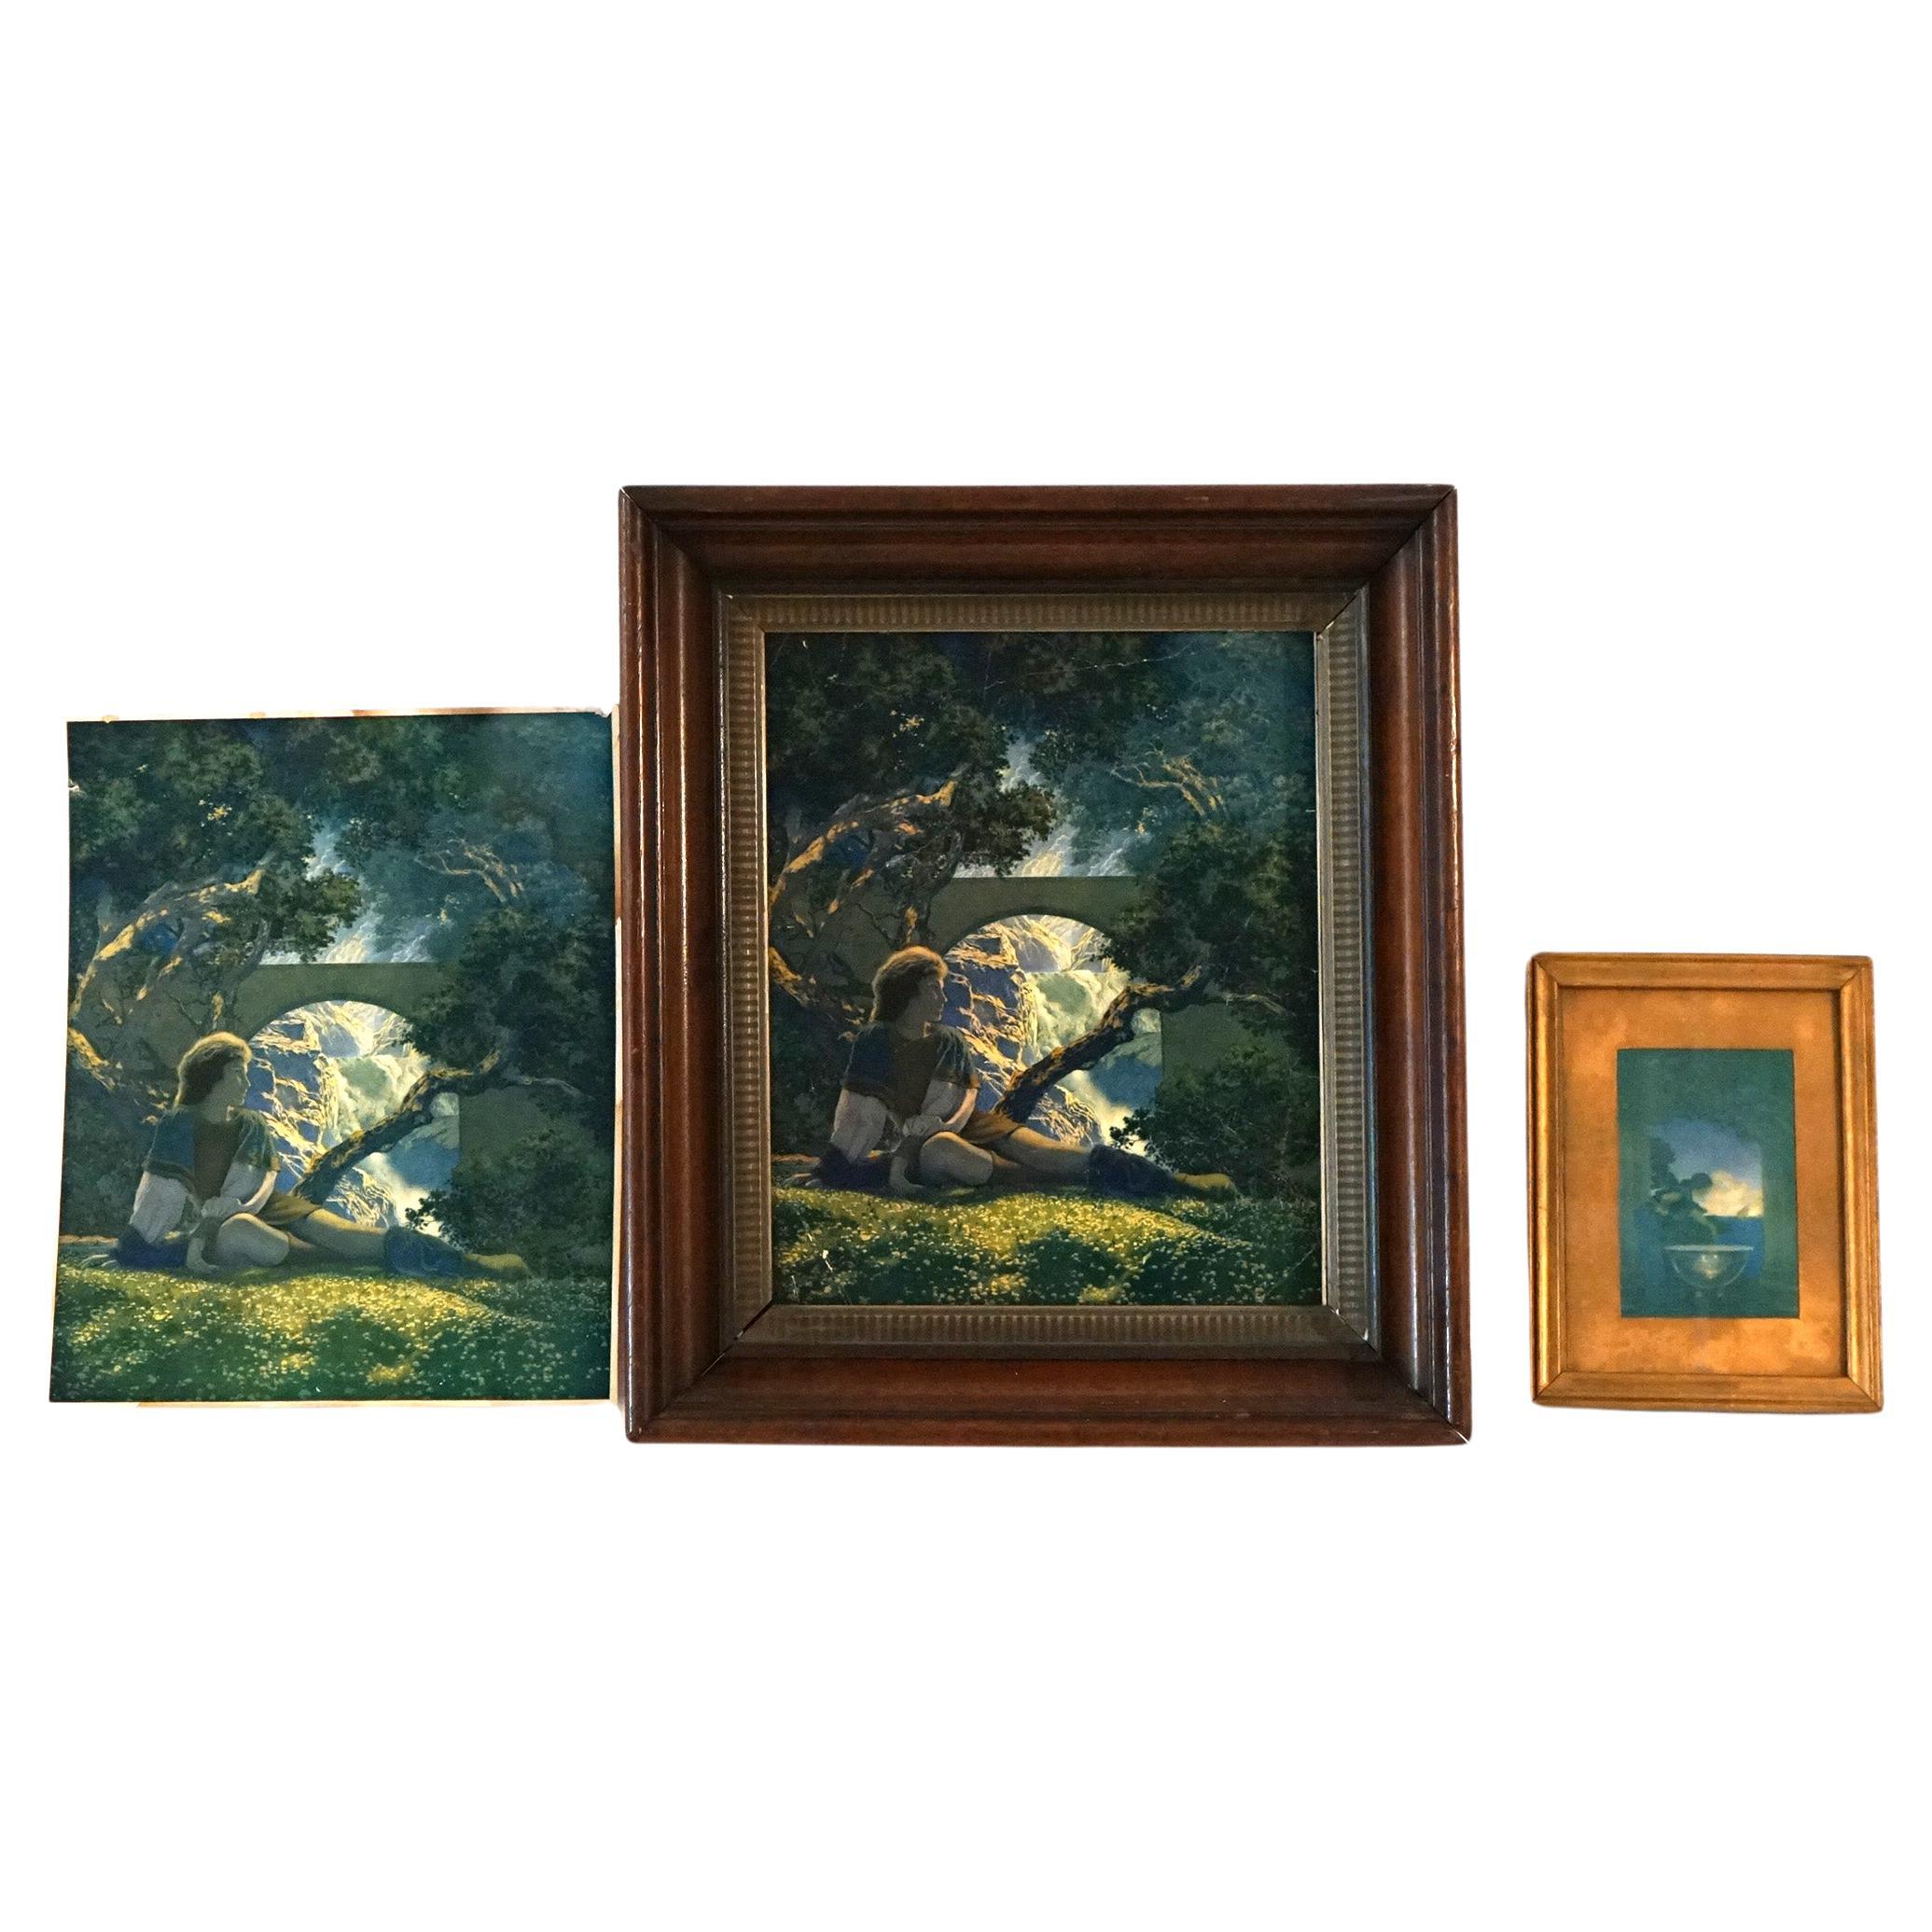 Three Art Deco Maxfield Parrish Prints Including “The Prince” C1920 For Sale